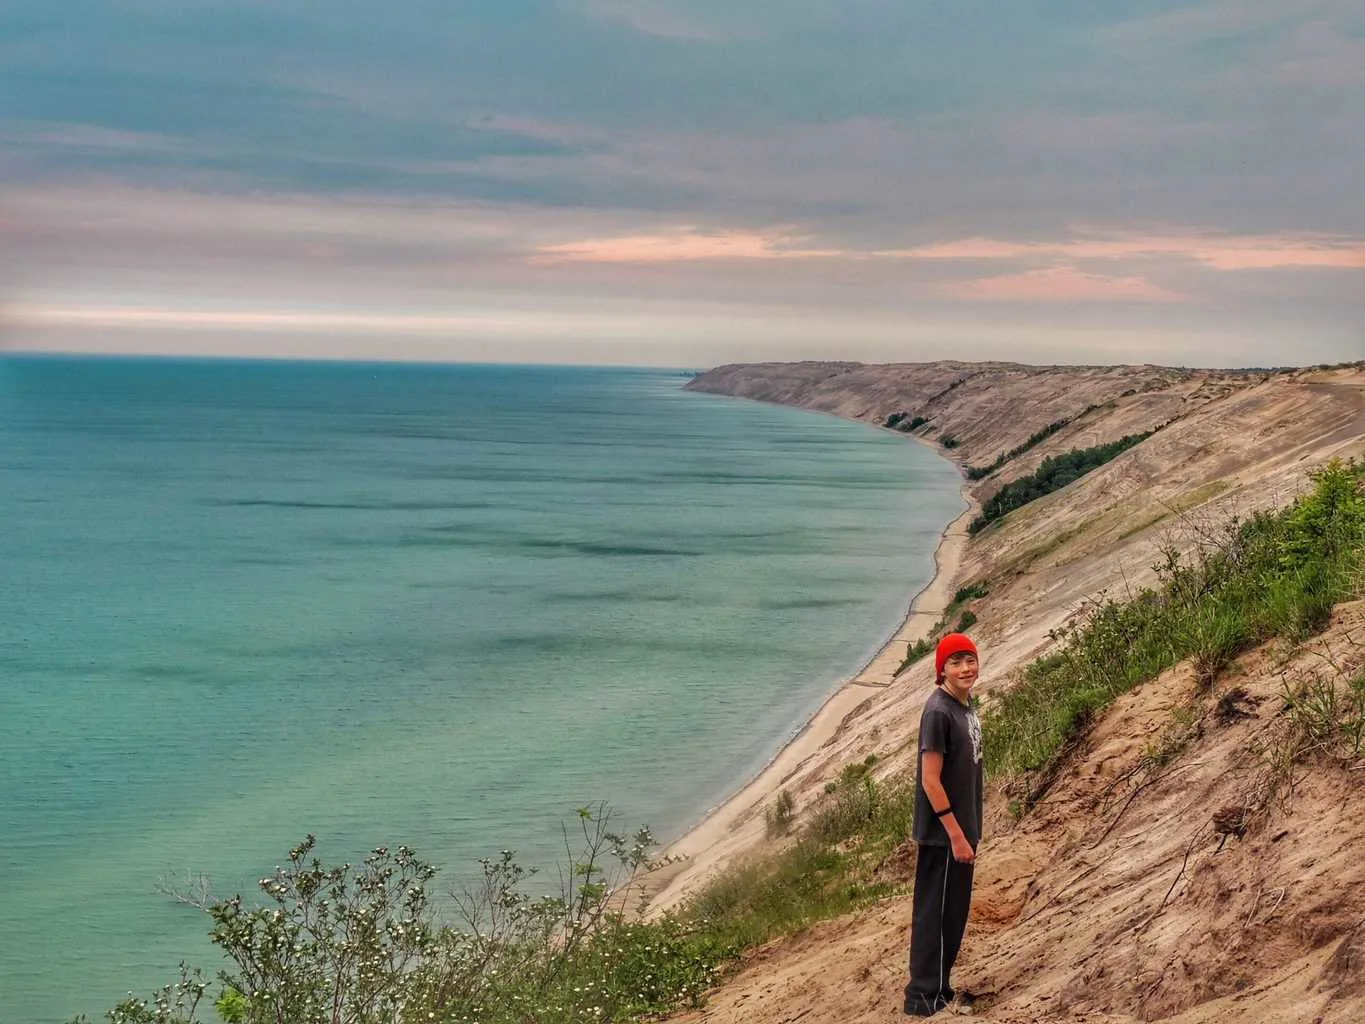 Rowan standing on a dune at the edge of Lake Superior at Pictured Rocks National Lakeshore in Michigan.